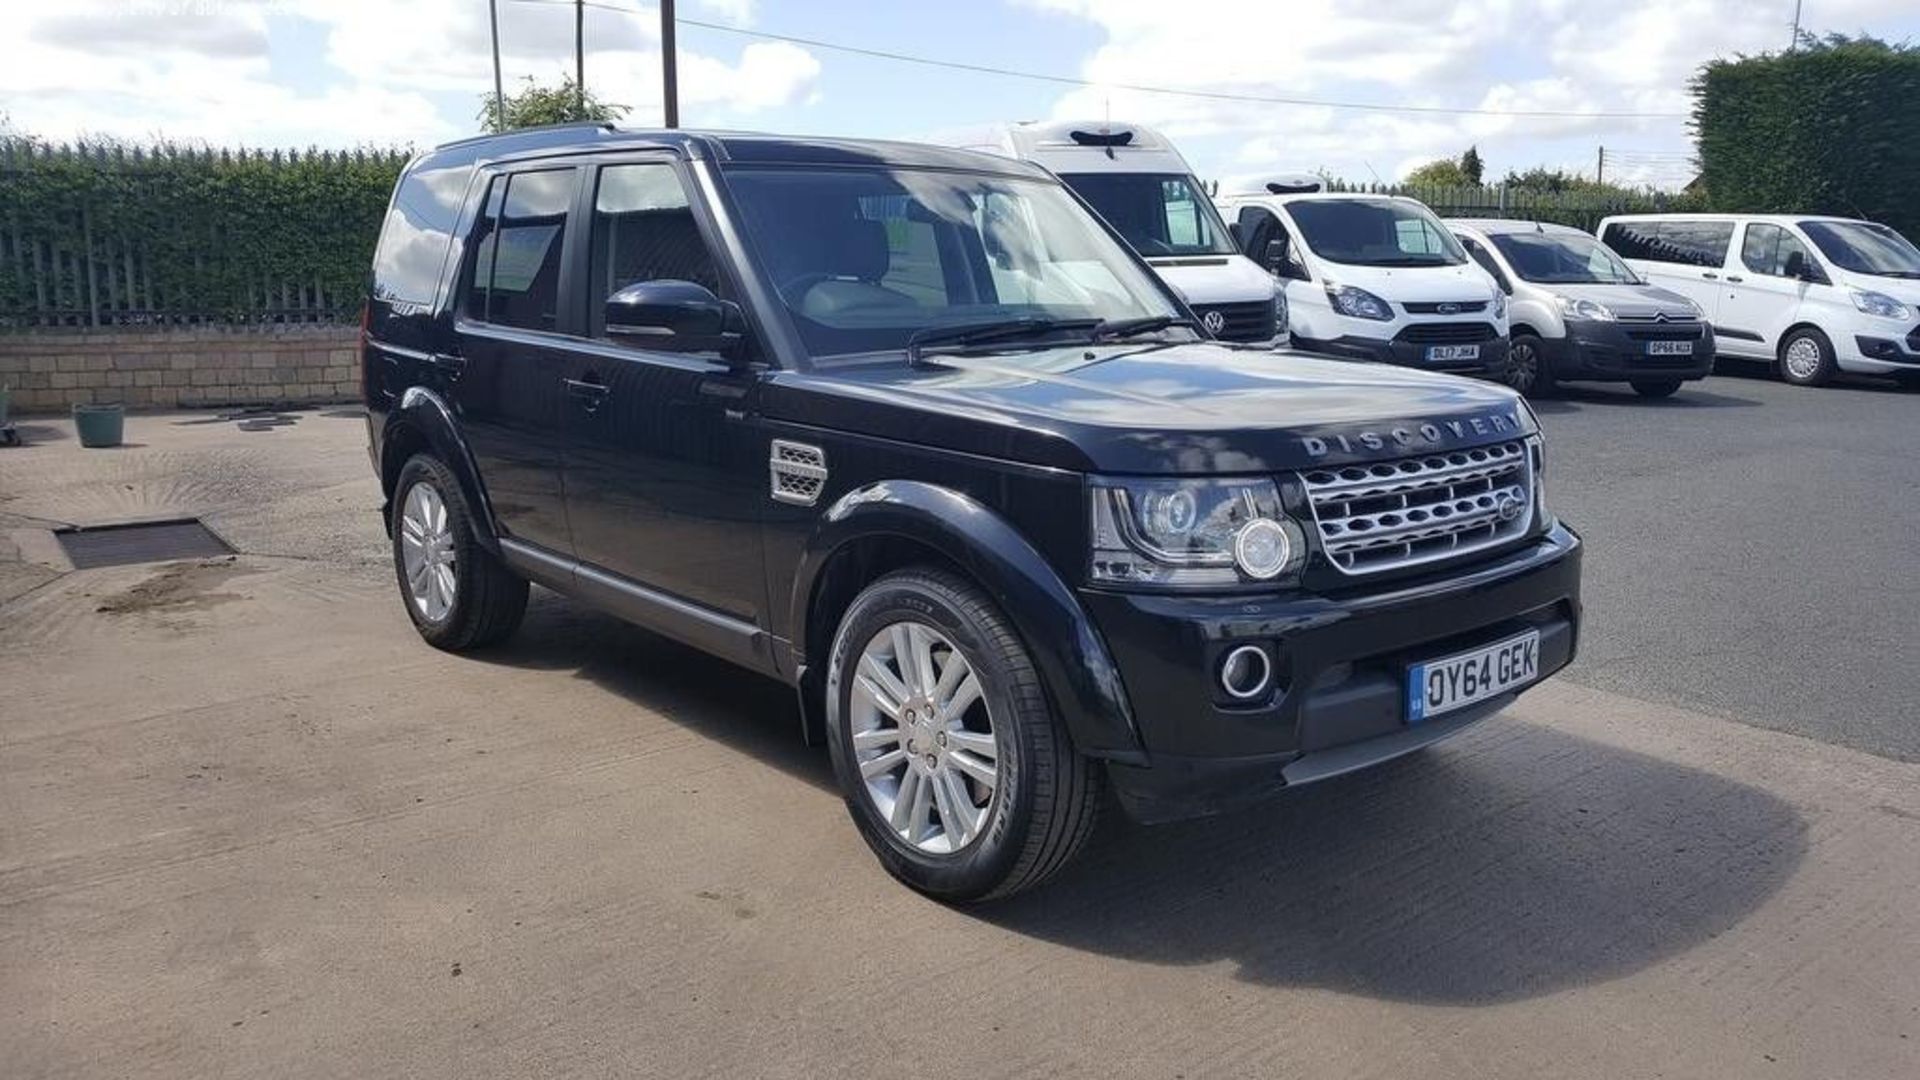 (2014) LANDROVER DISCOVERY 4 3.0L V6HSE APPROX 40k 5 DOOR 7 SEATER MERINA BLACK LEATHER INTERIOR